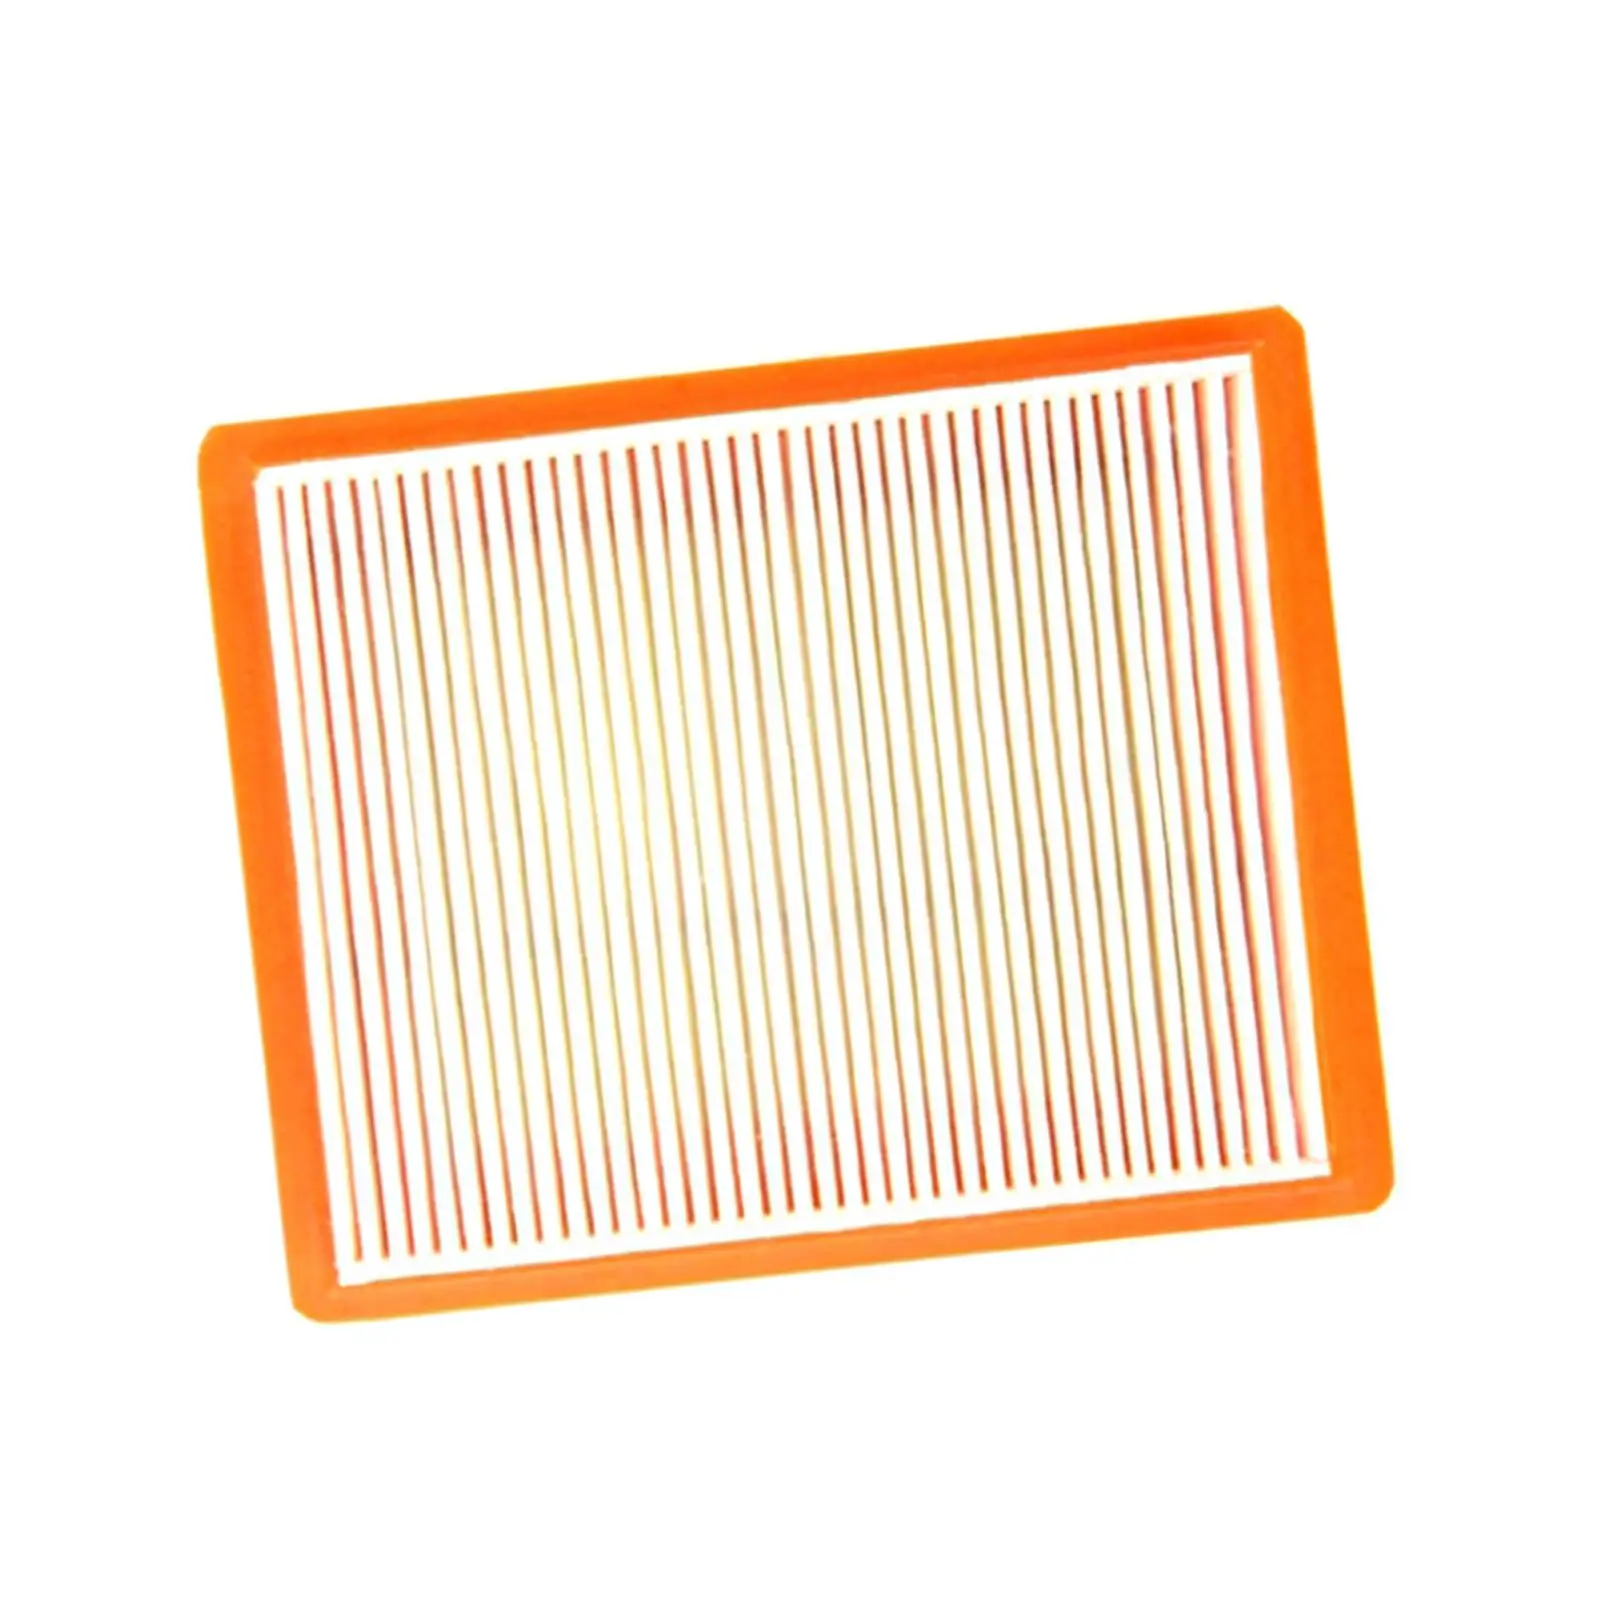 Lawn Mower Air Filter Replacement Accessories for XT650 for XT675 Engine